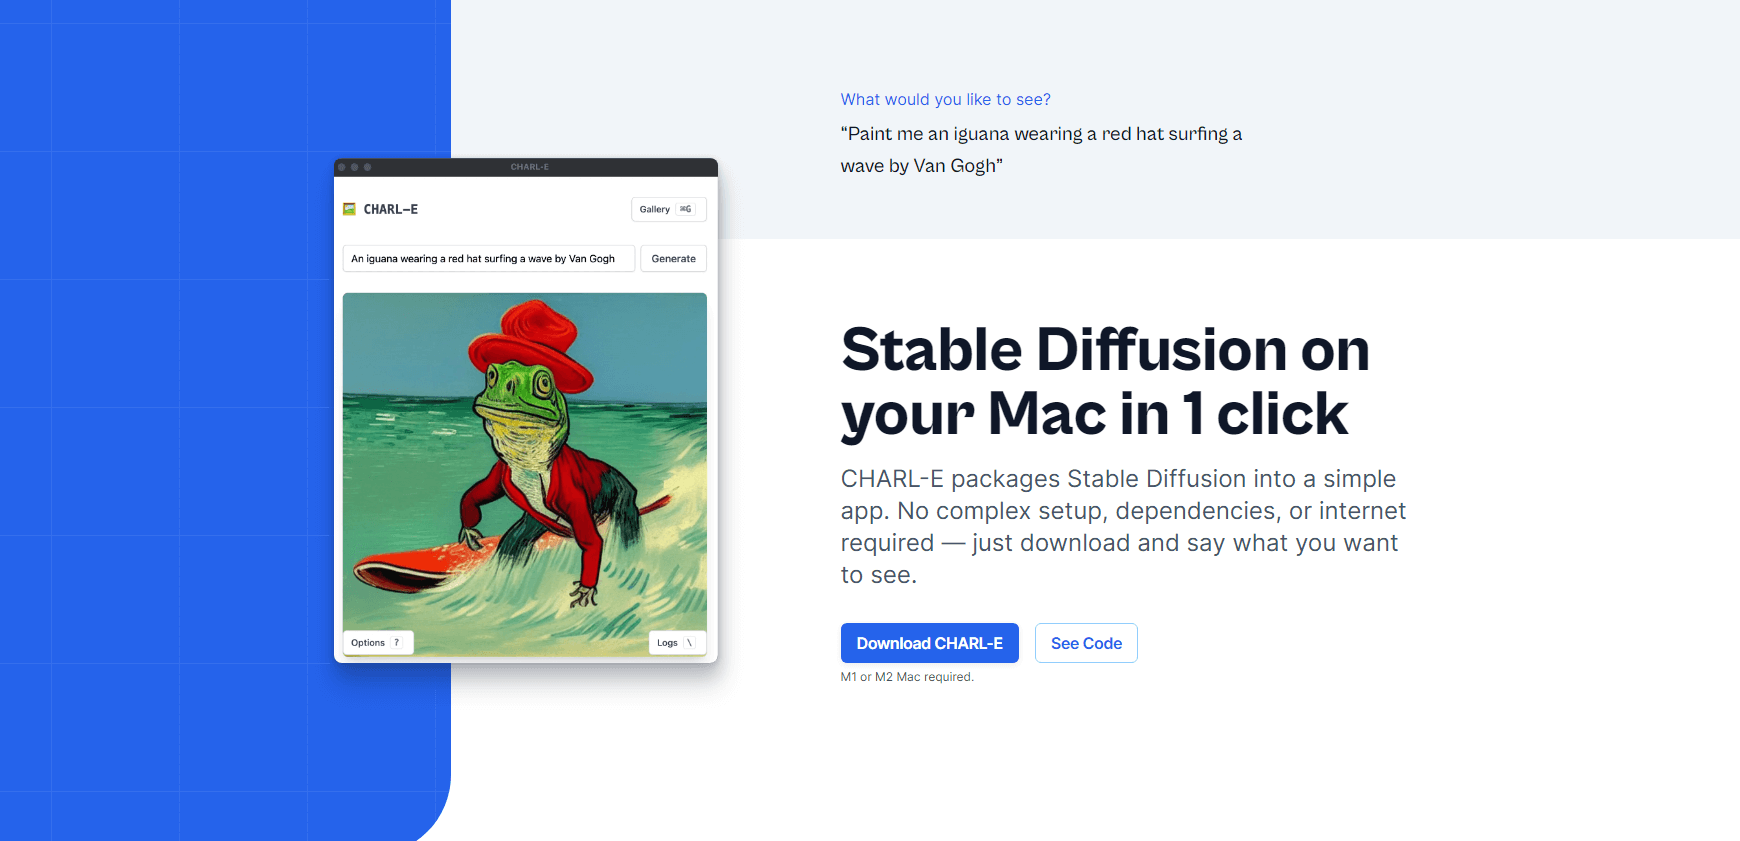 Stable Diffusion on your Mac in 1 click with CHARL-E